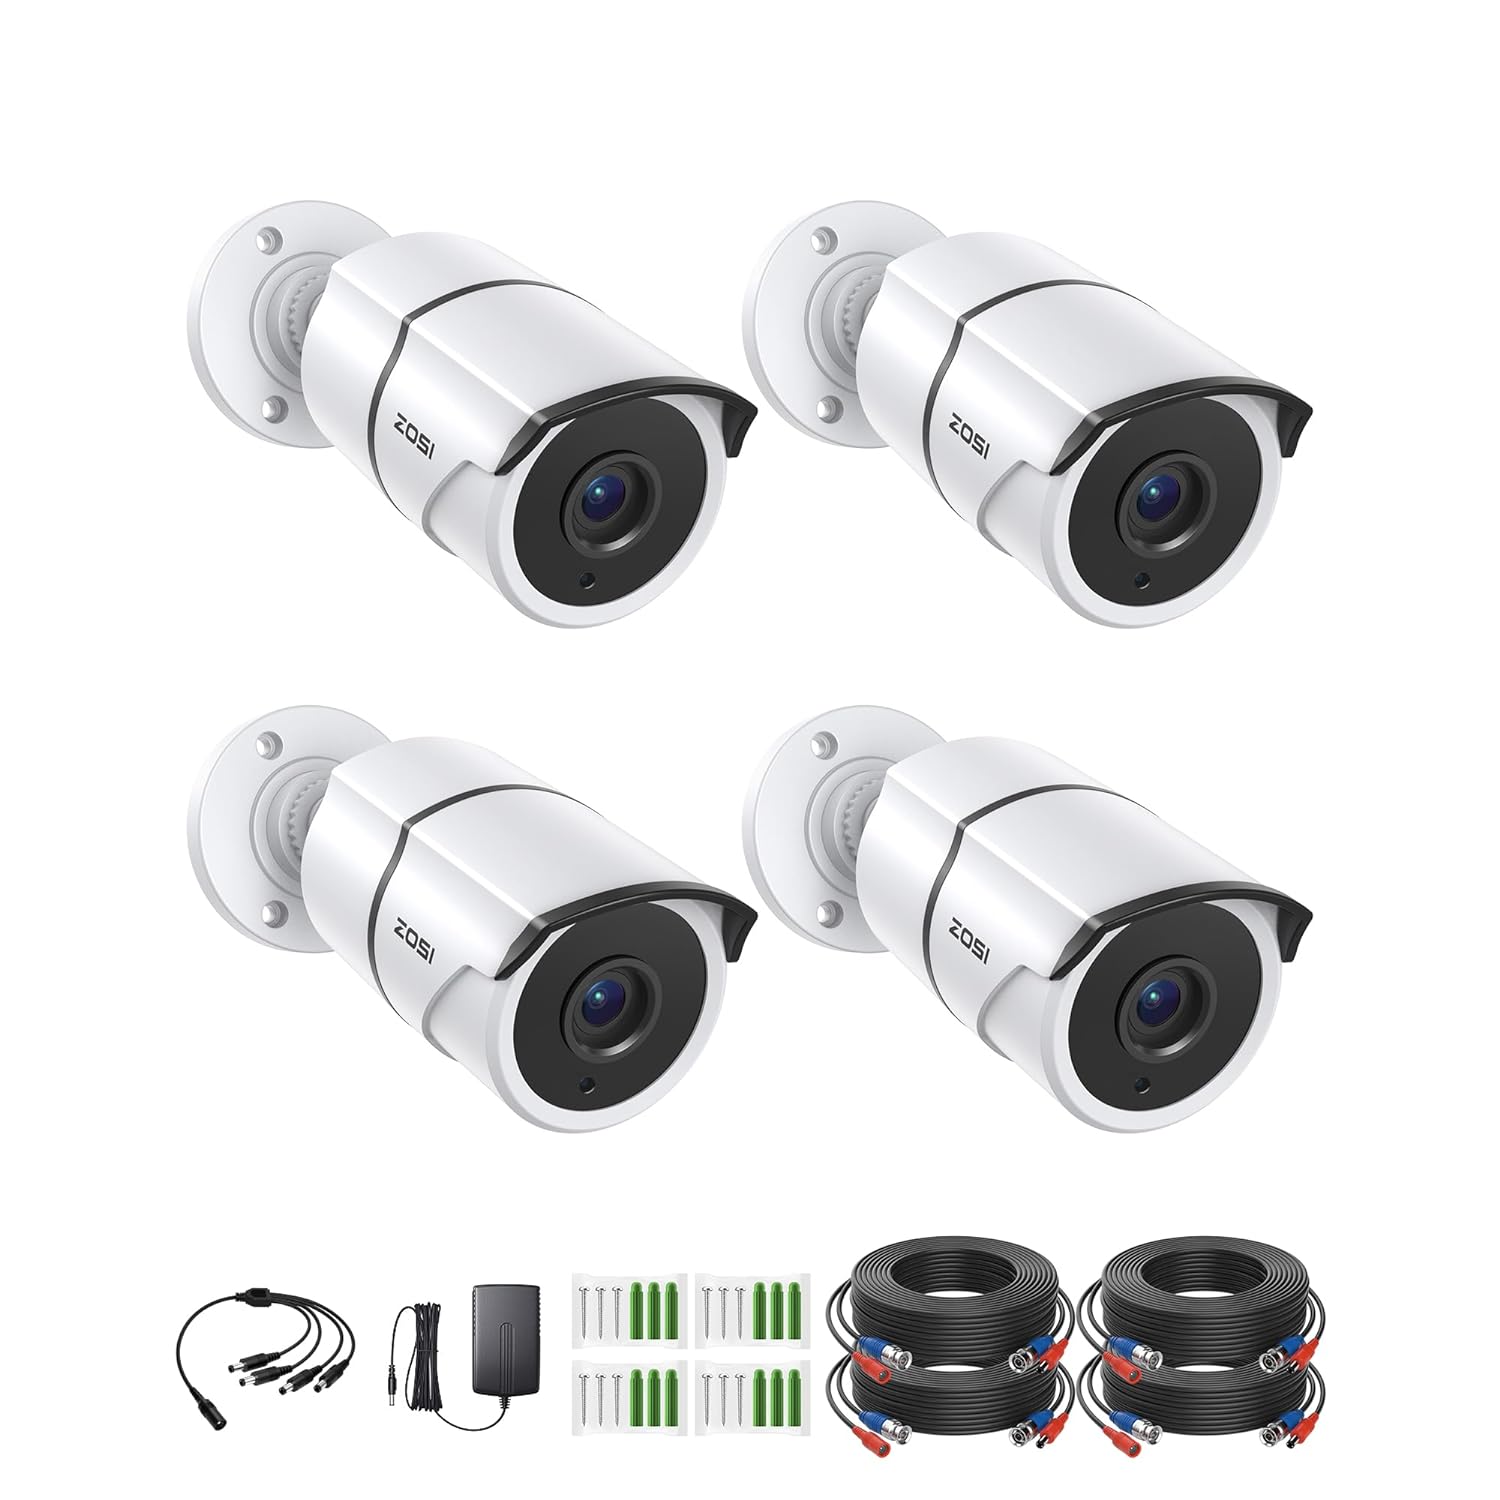 Great Choice Products 4Pack 1920Tvl 1080P Hd Tvi Security Cameras 120Ft Night Vision Cctv Cameras Home Security Day/Night Waterproof Camera Fo…